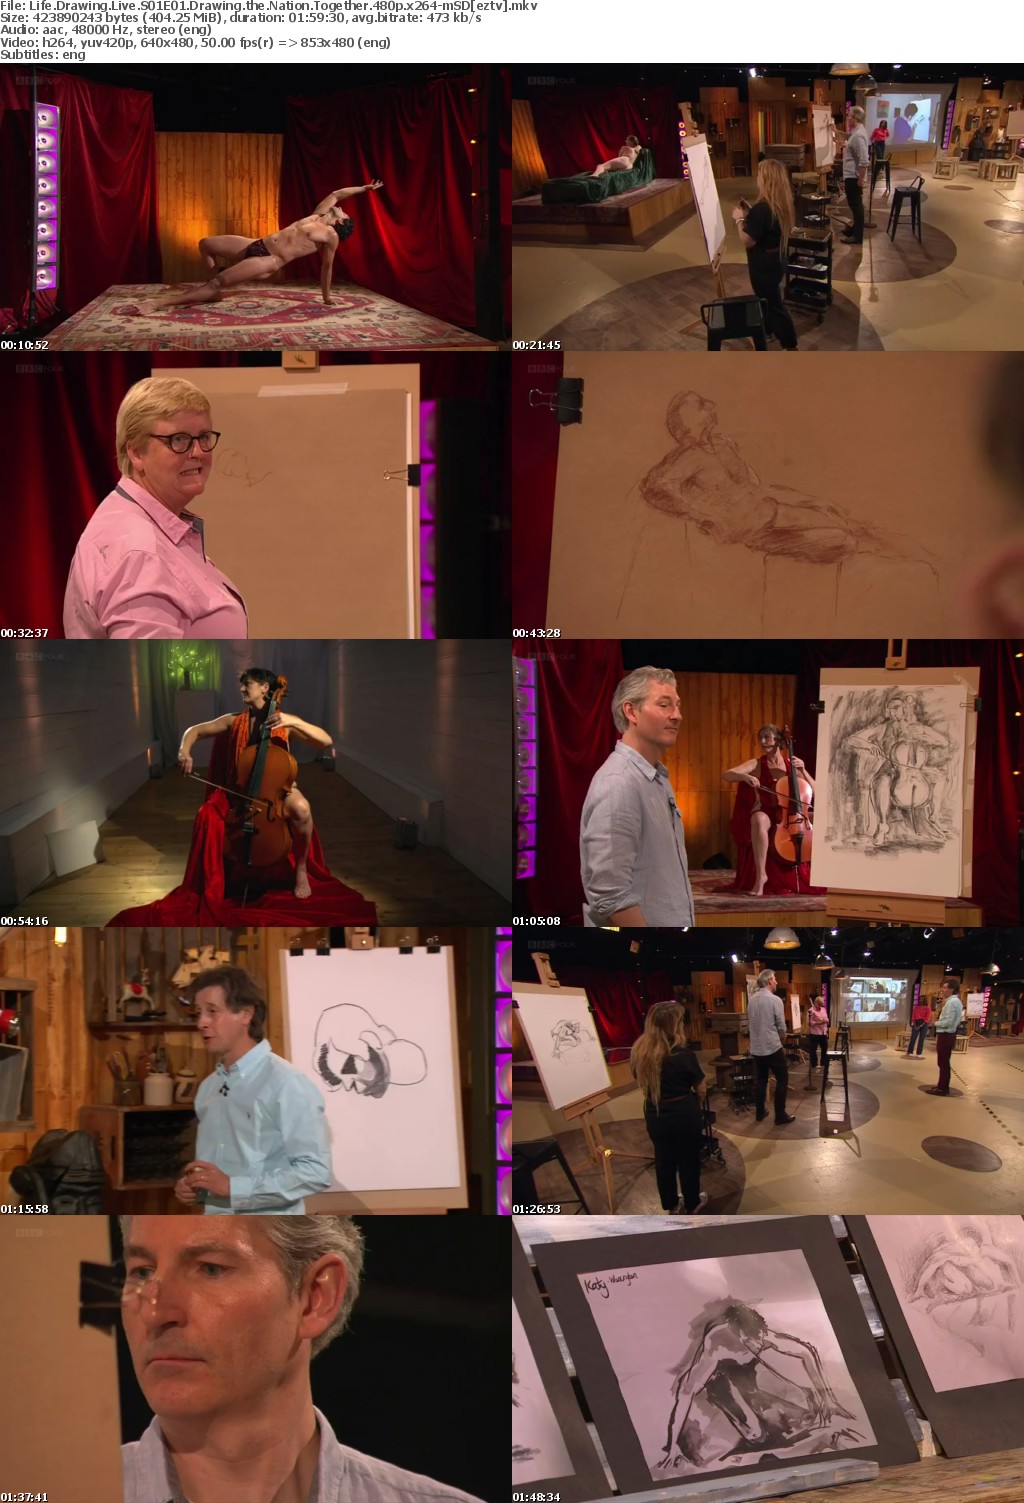 Life Drawing Live S01E01 Drawing the Nation Together 480p x264-mSD